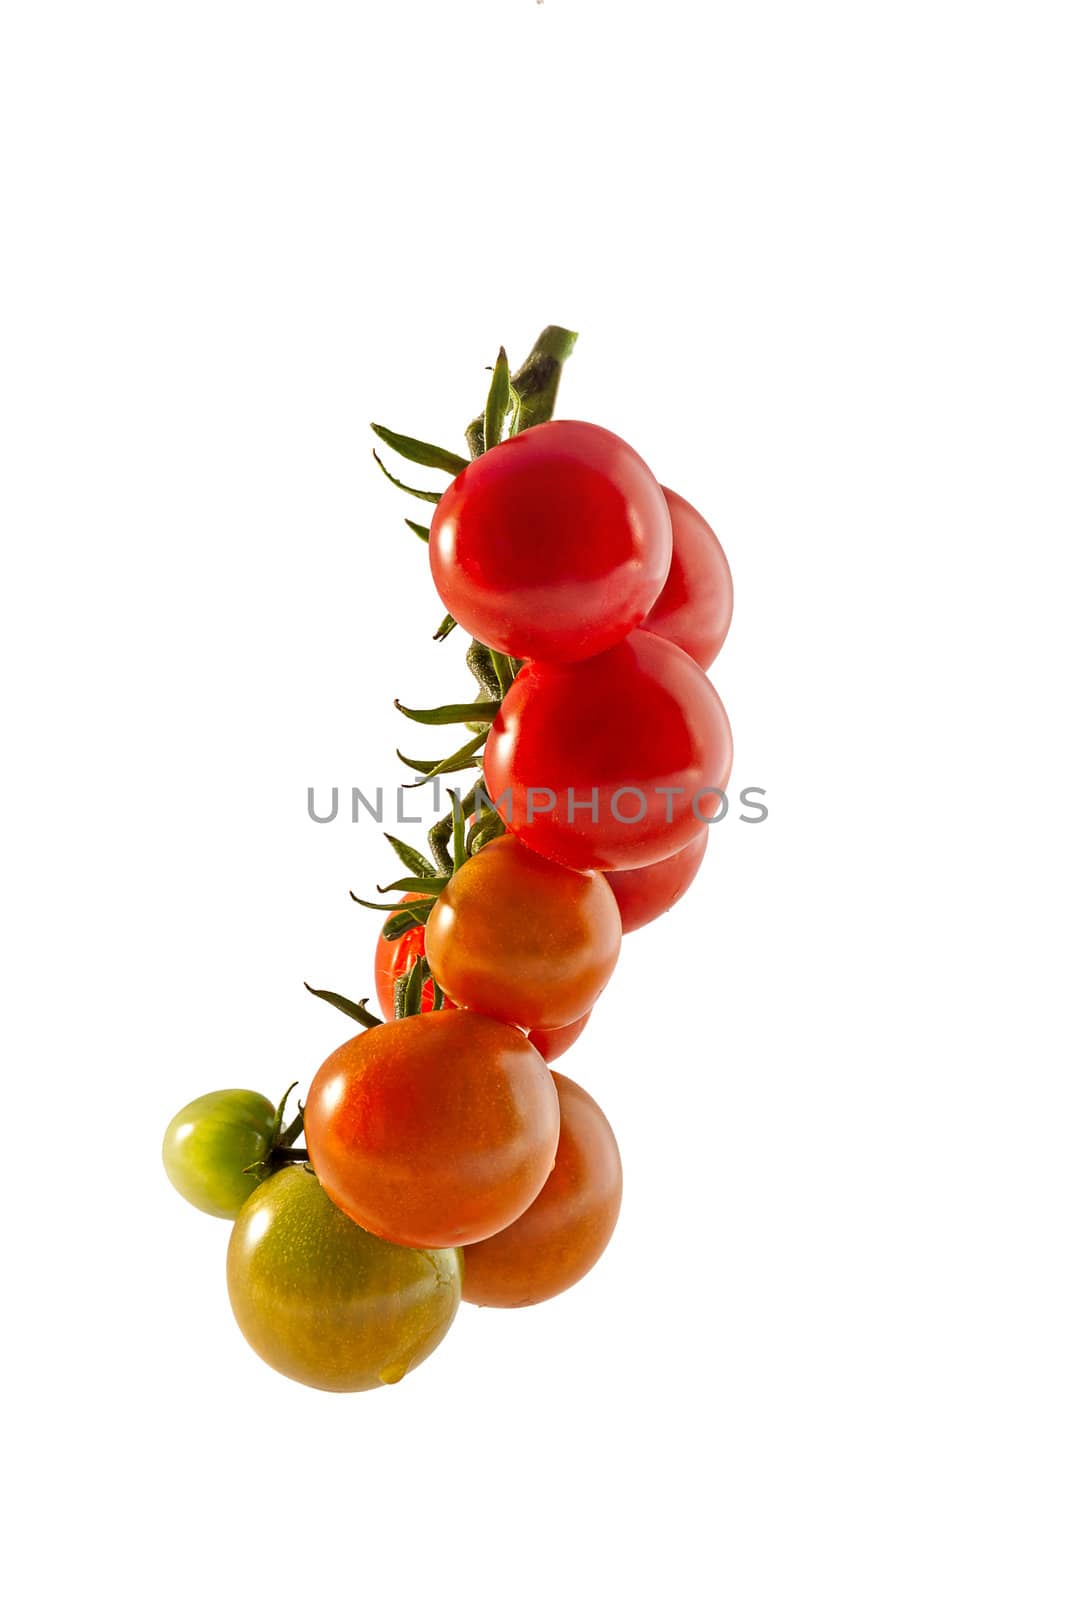 Cherry tomatoes close-up, isolated on white background.